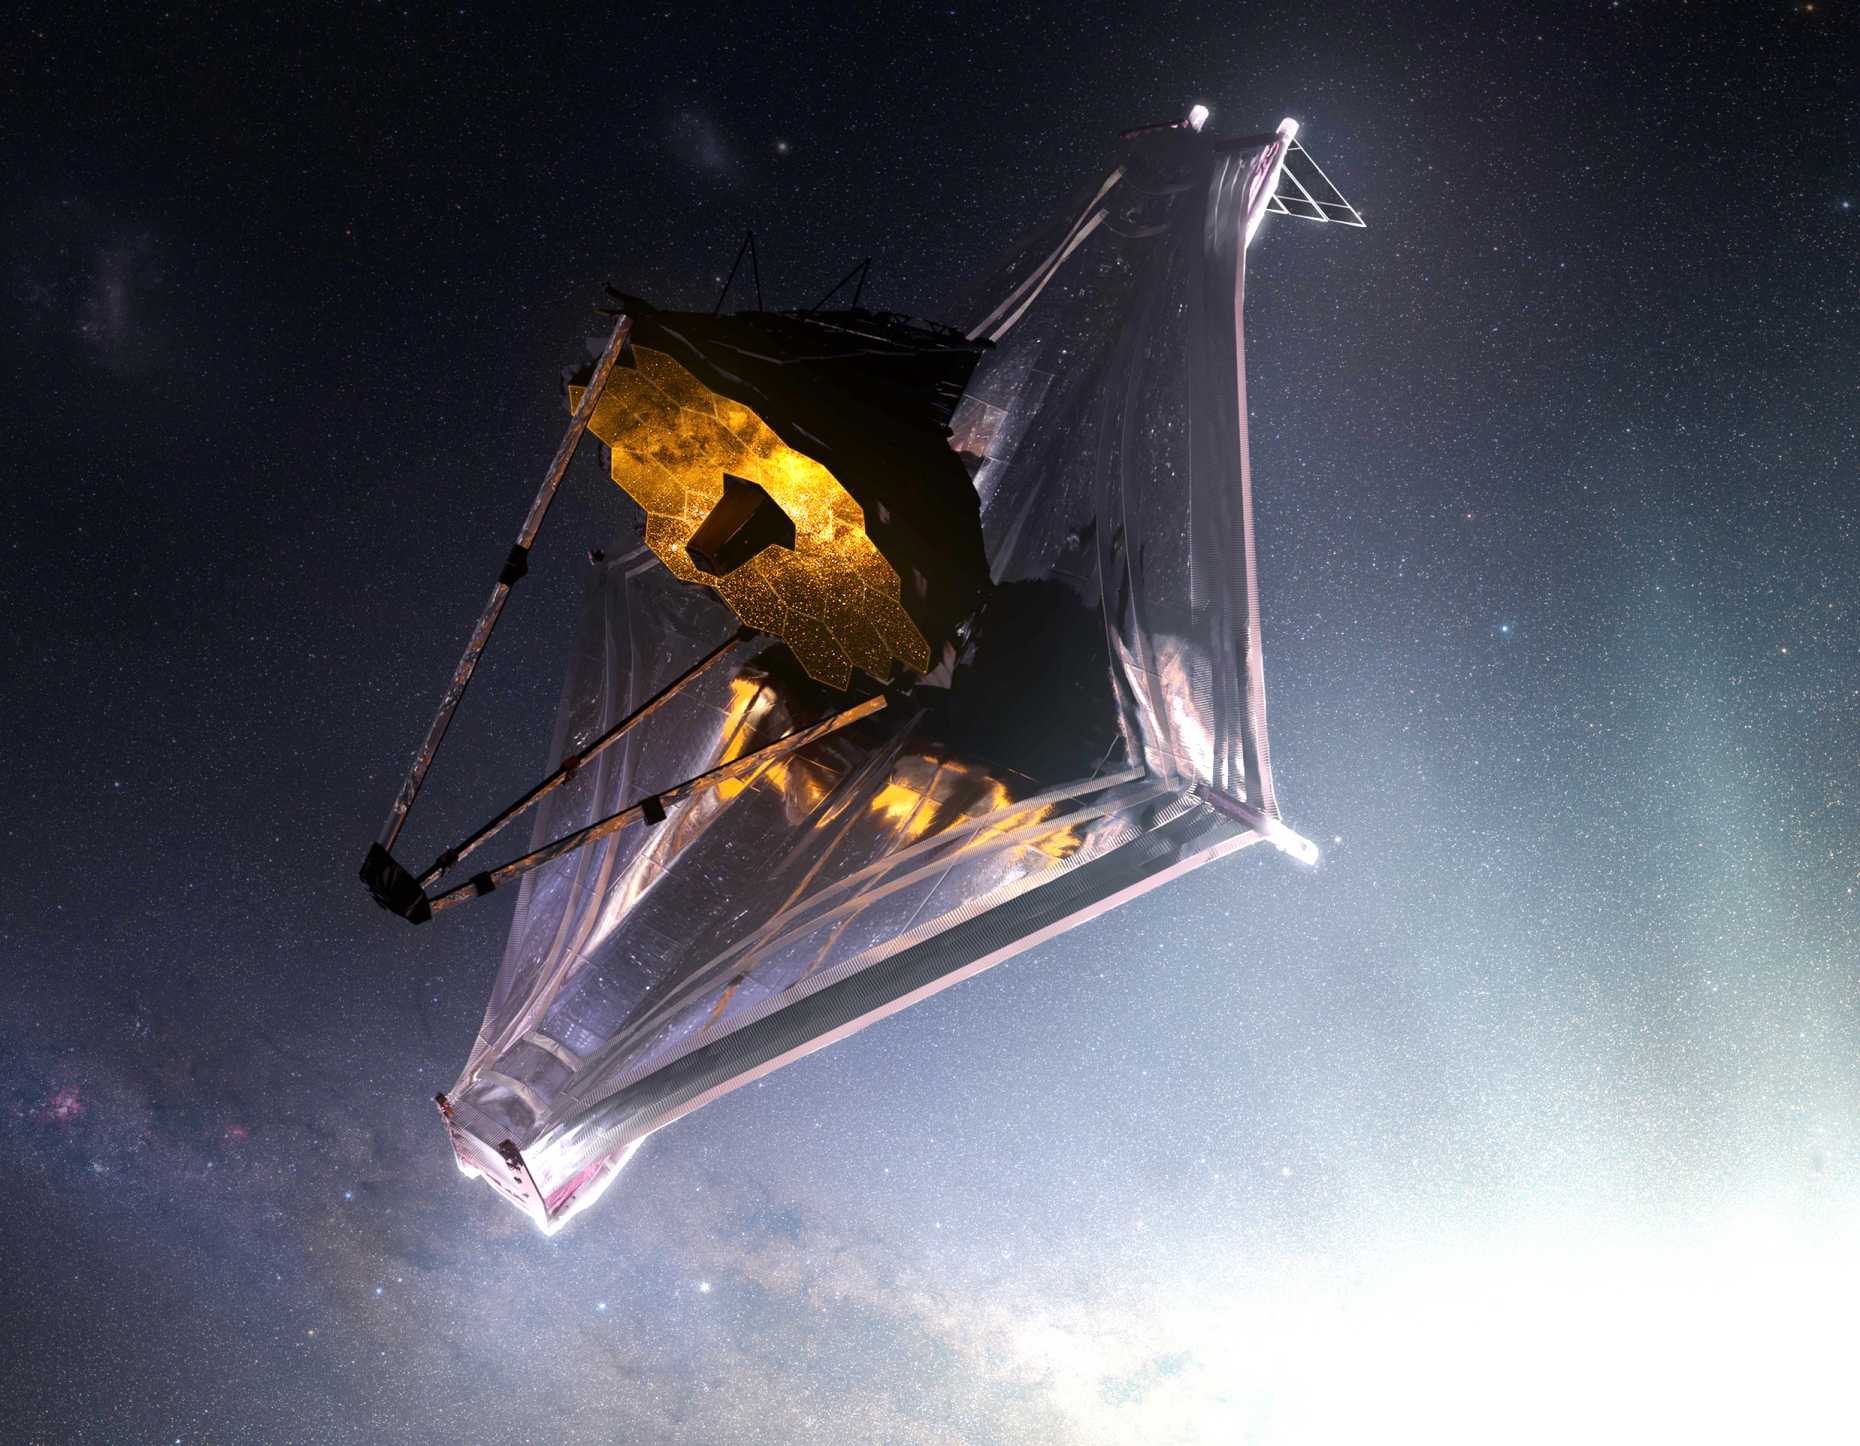 Enlarged view: Artist conception of the James Webb Space Telescope